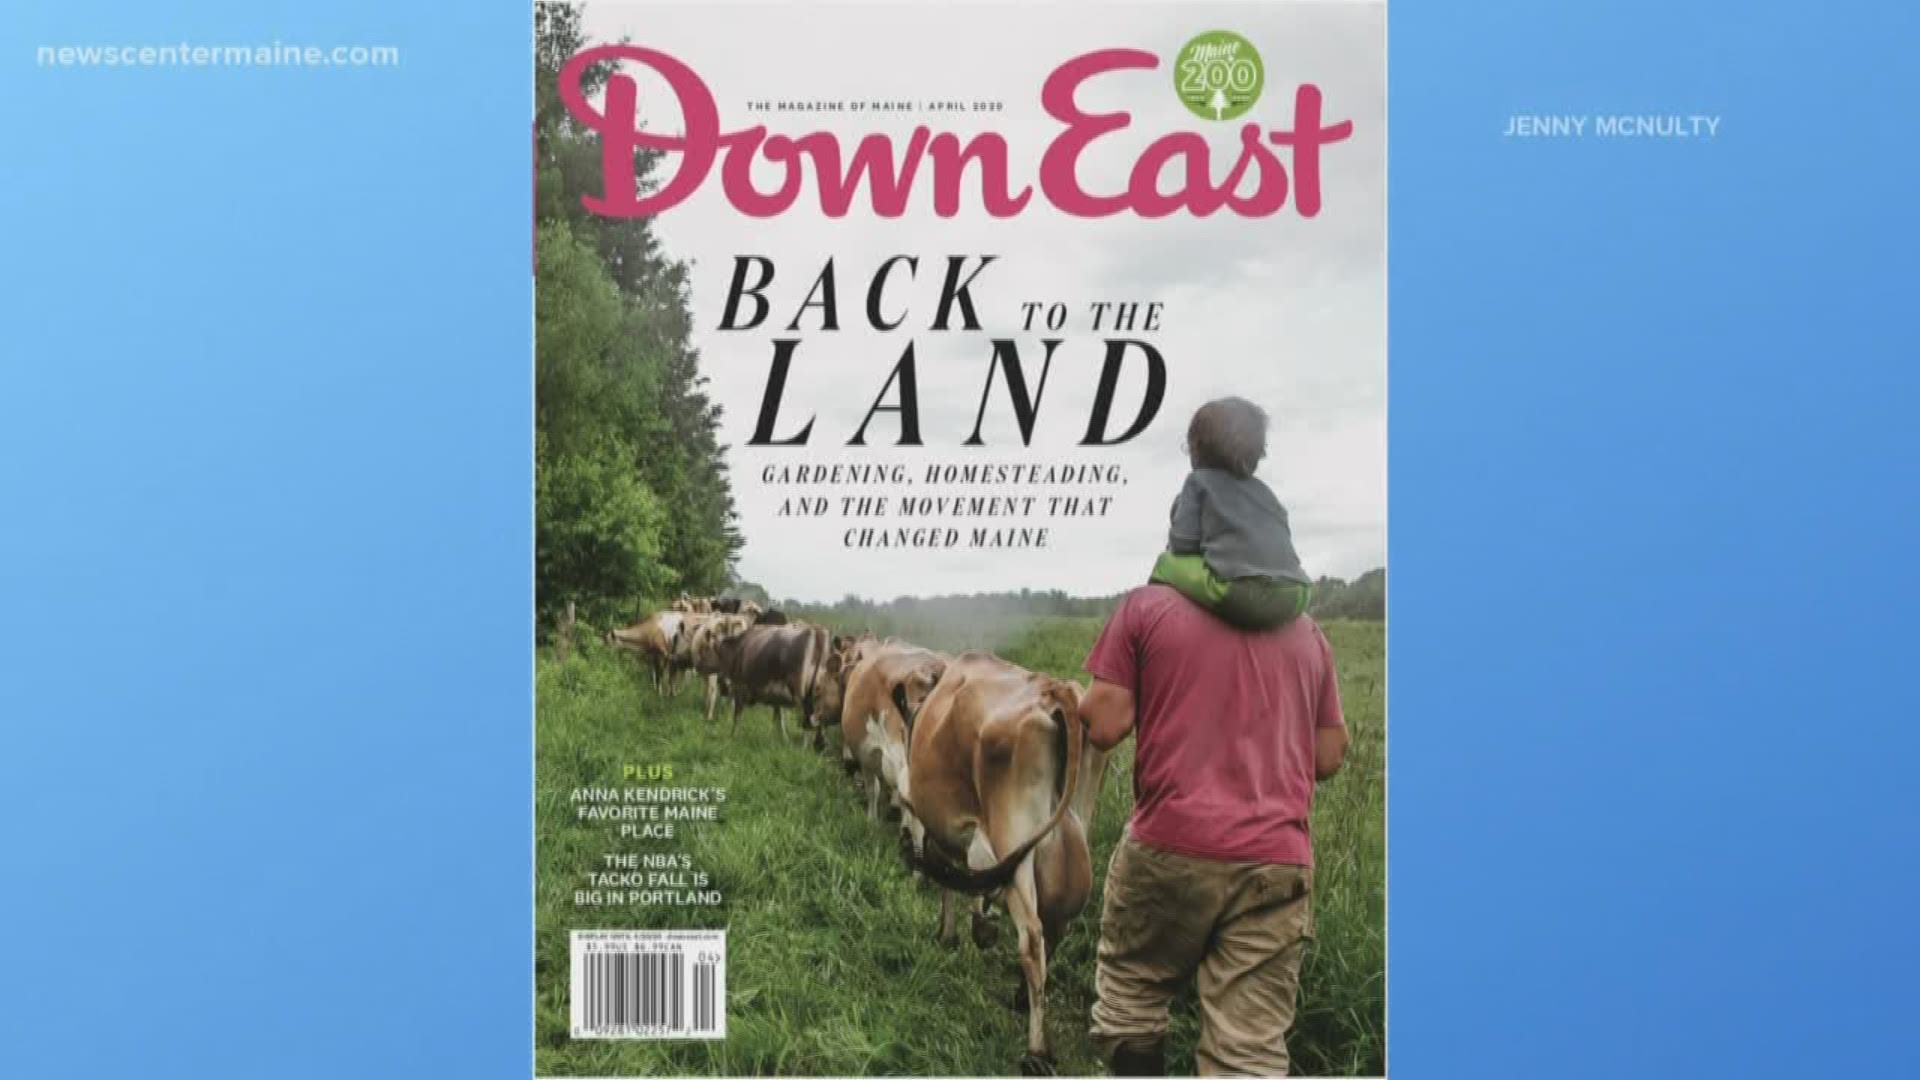 “Down East” magazine looks at the back to the land movement.